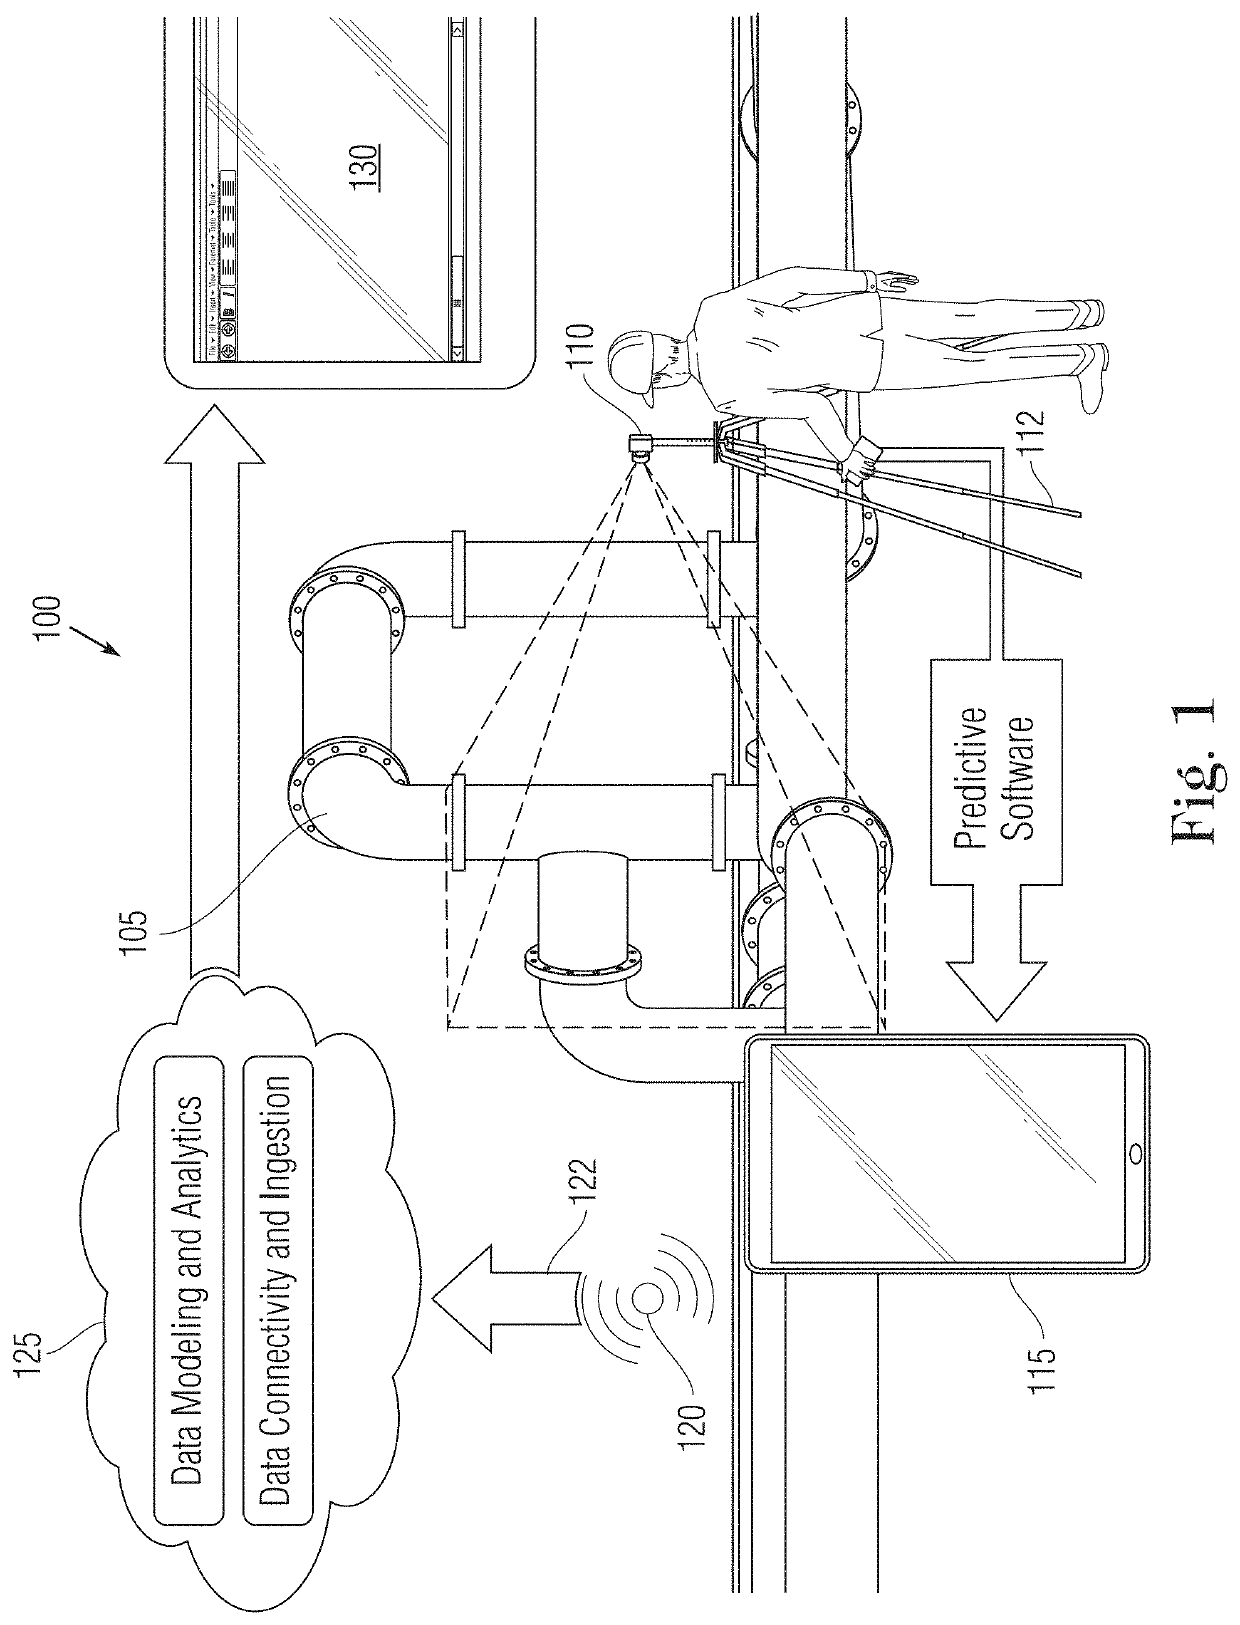 Inspection and failure detection of corrosion under fireproofing insulation using a hybrid sensory system